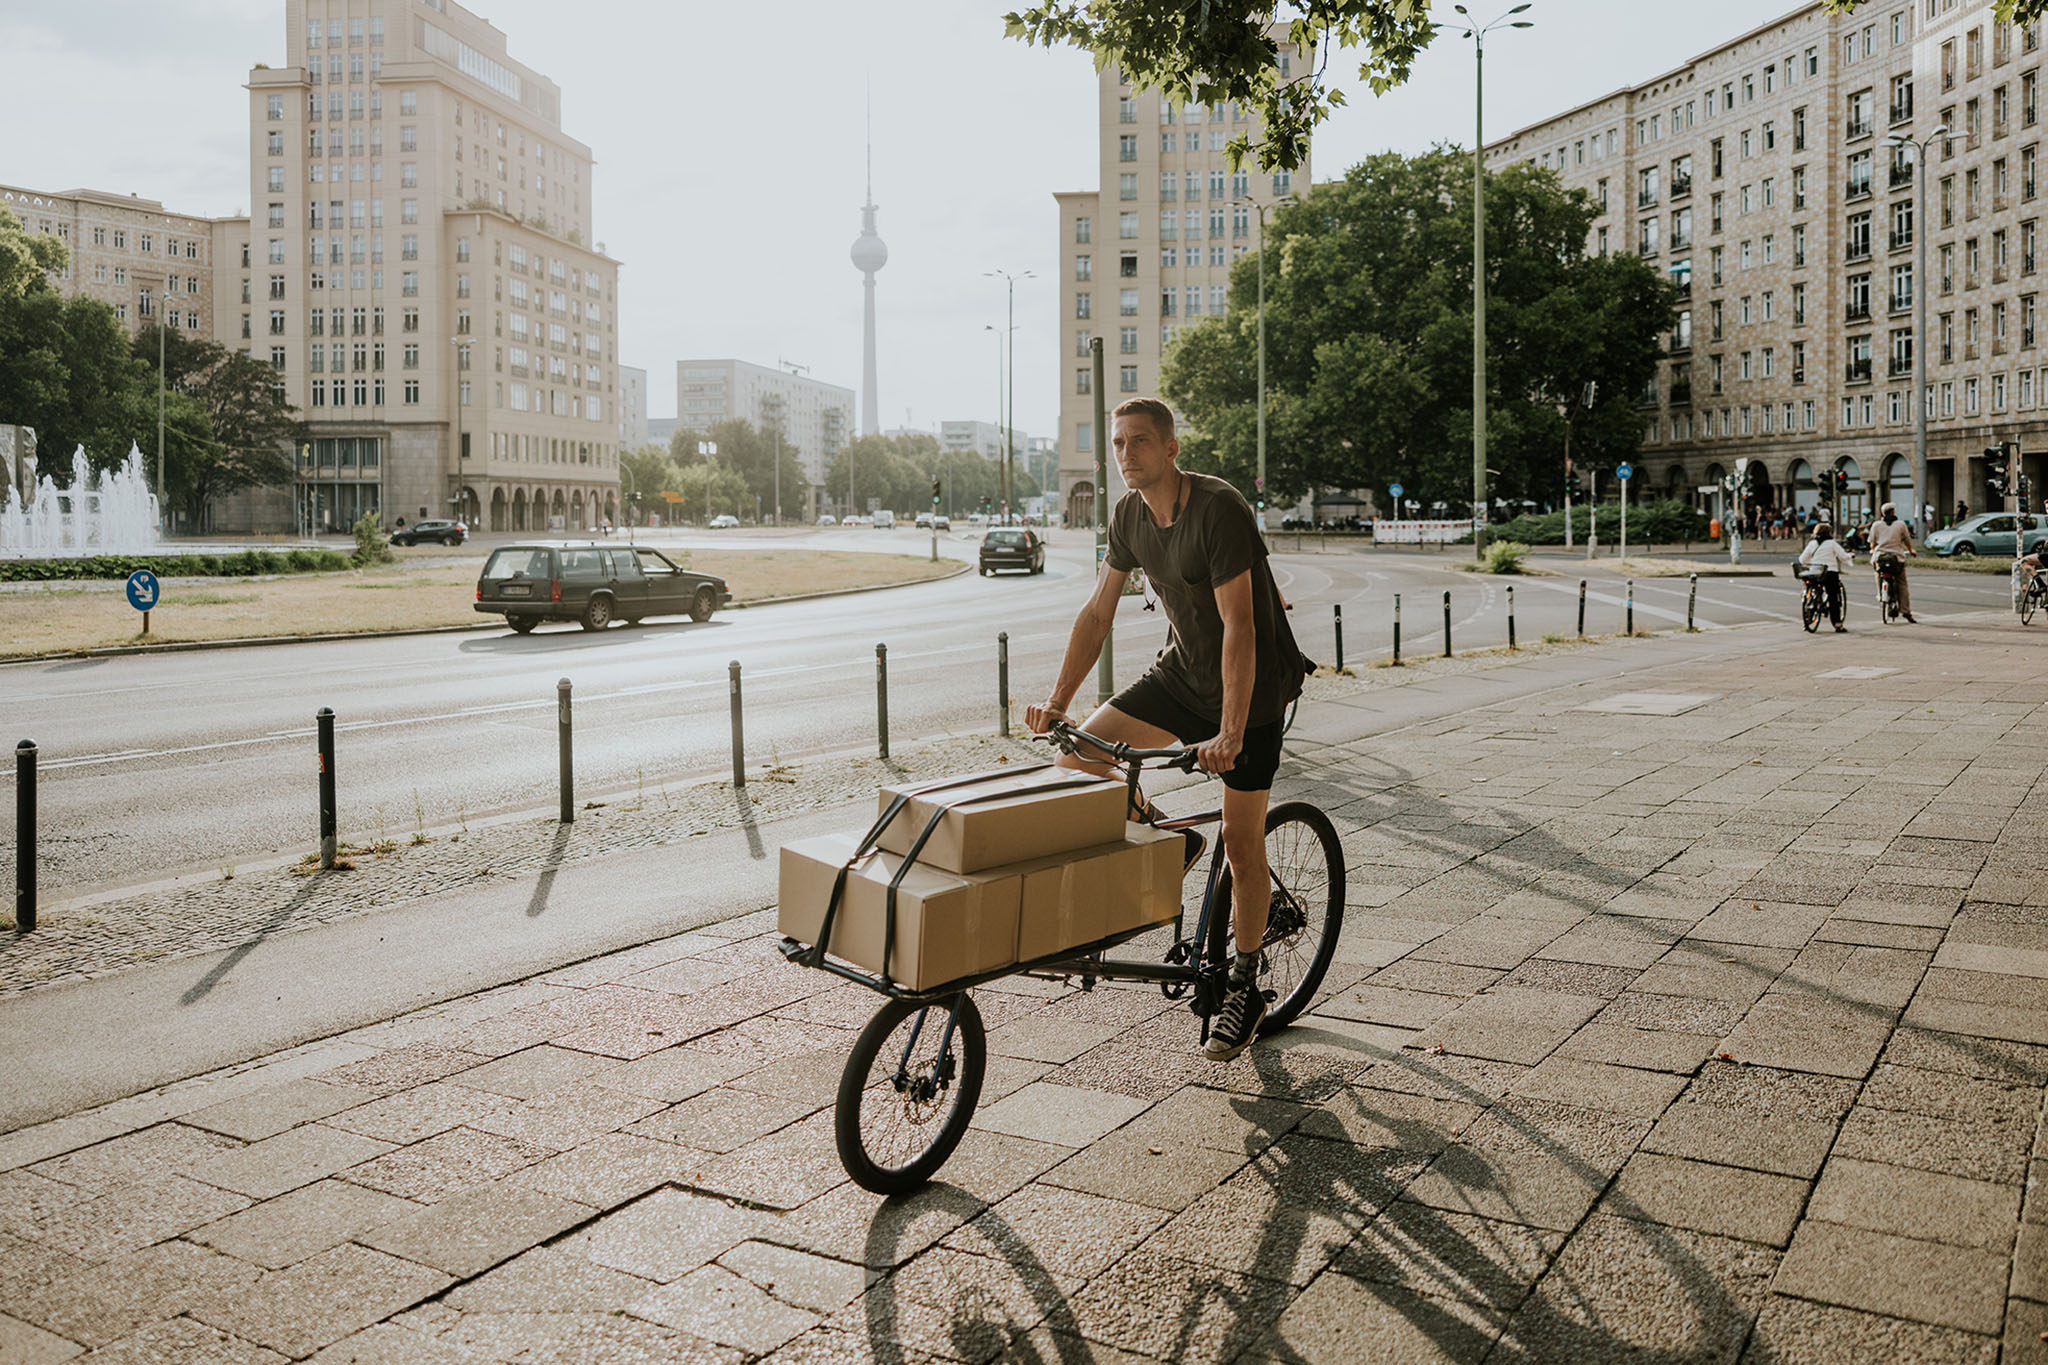 optimised routes with cargo bikes can reduce cost of last mile delivery